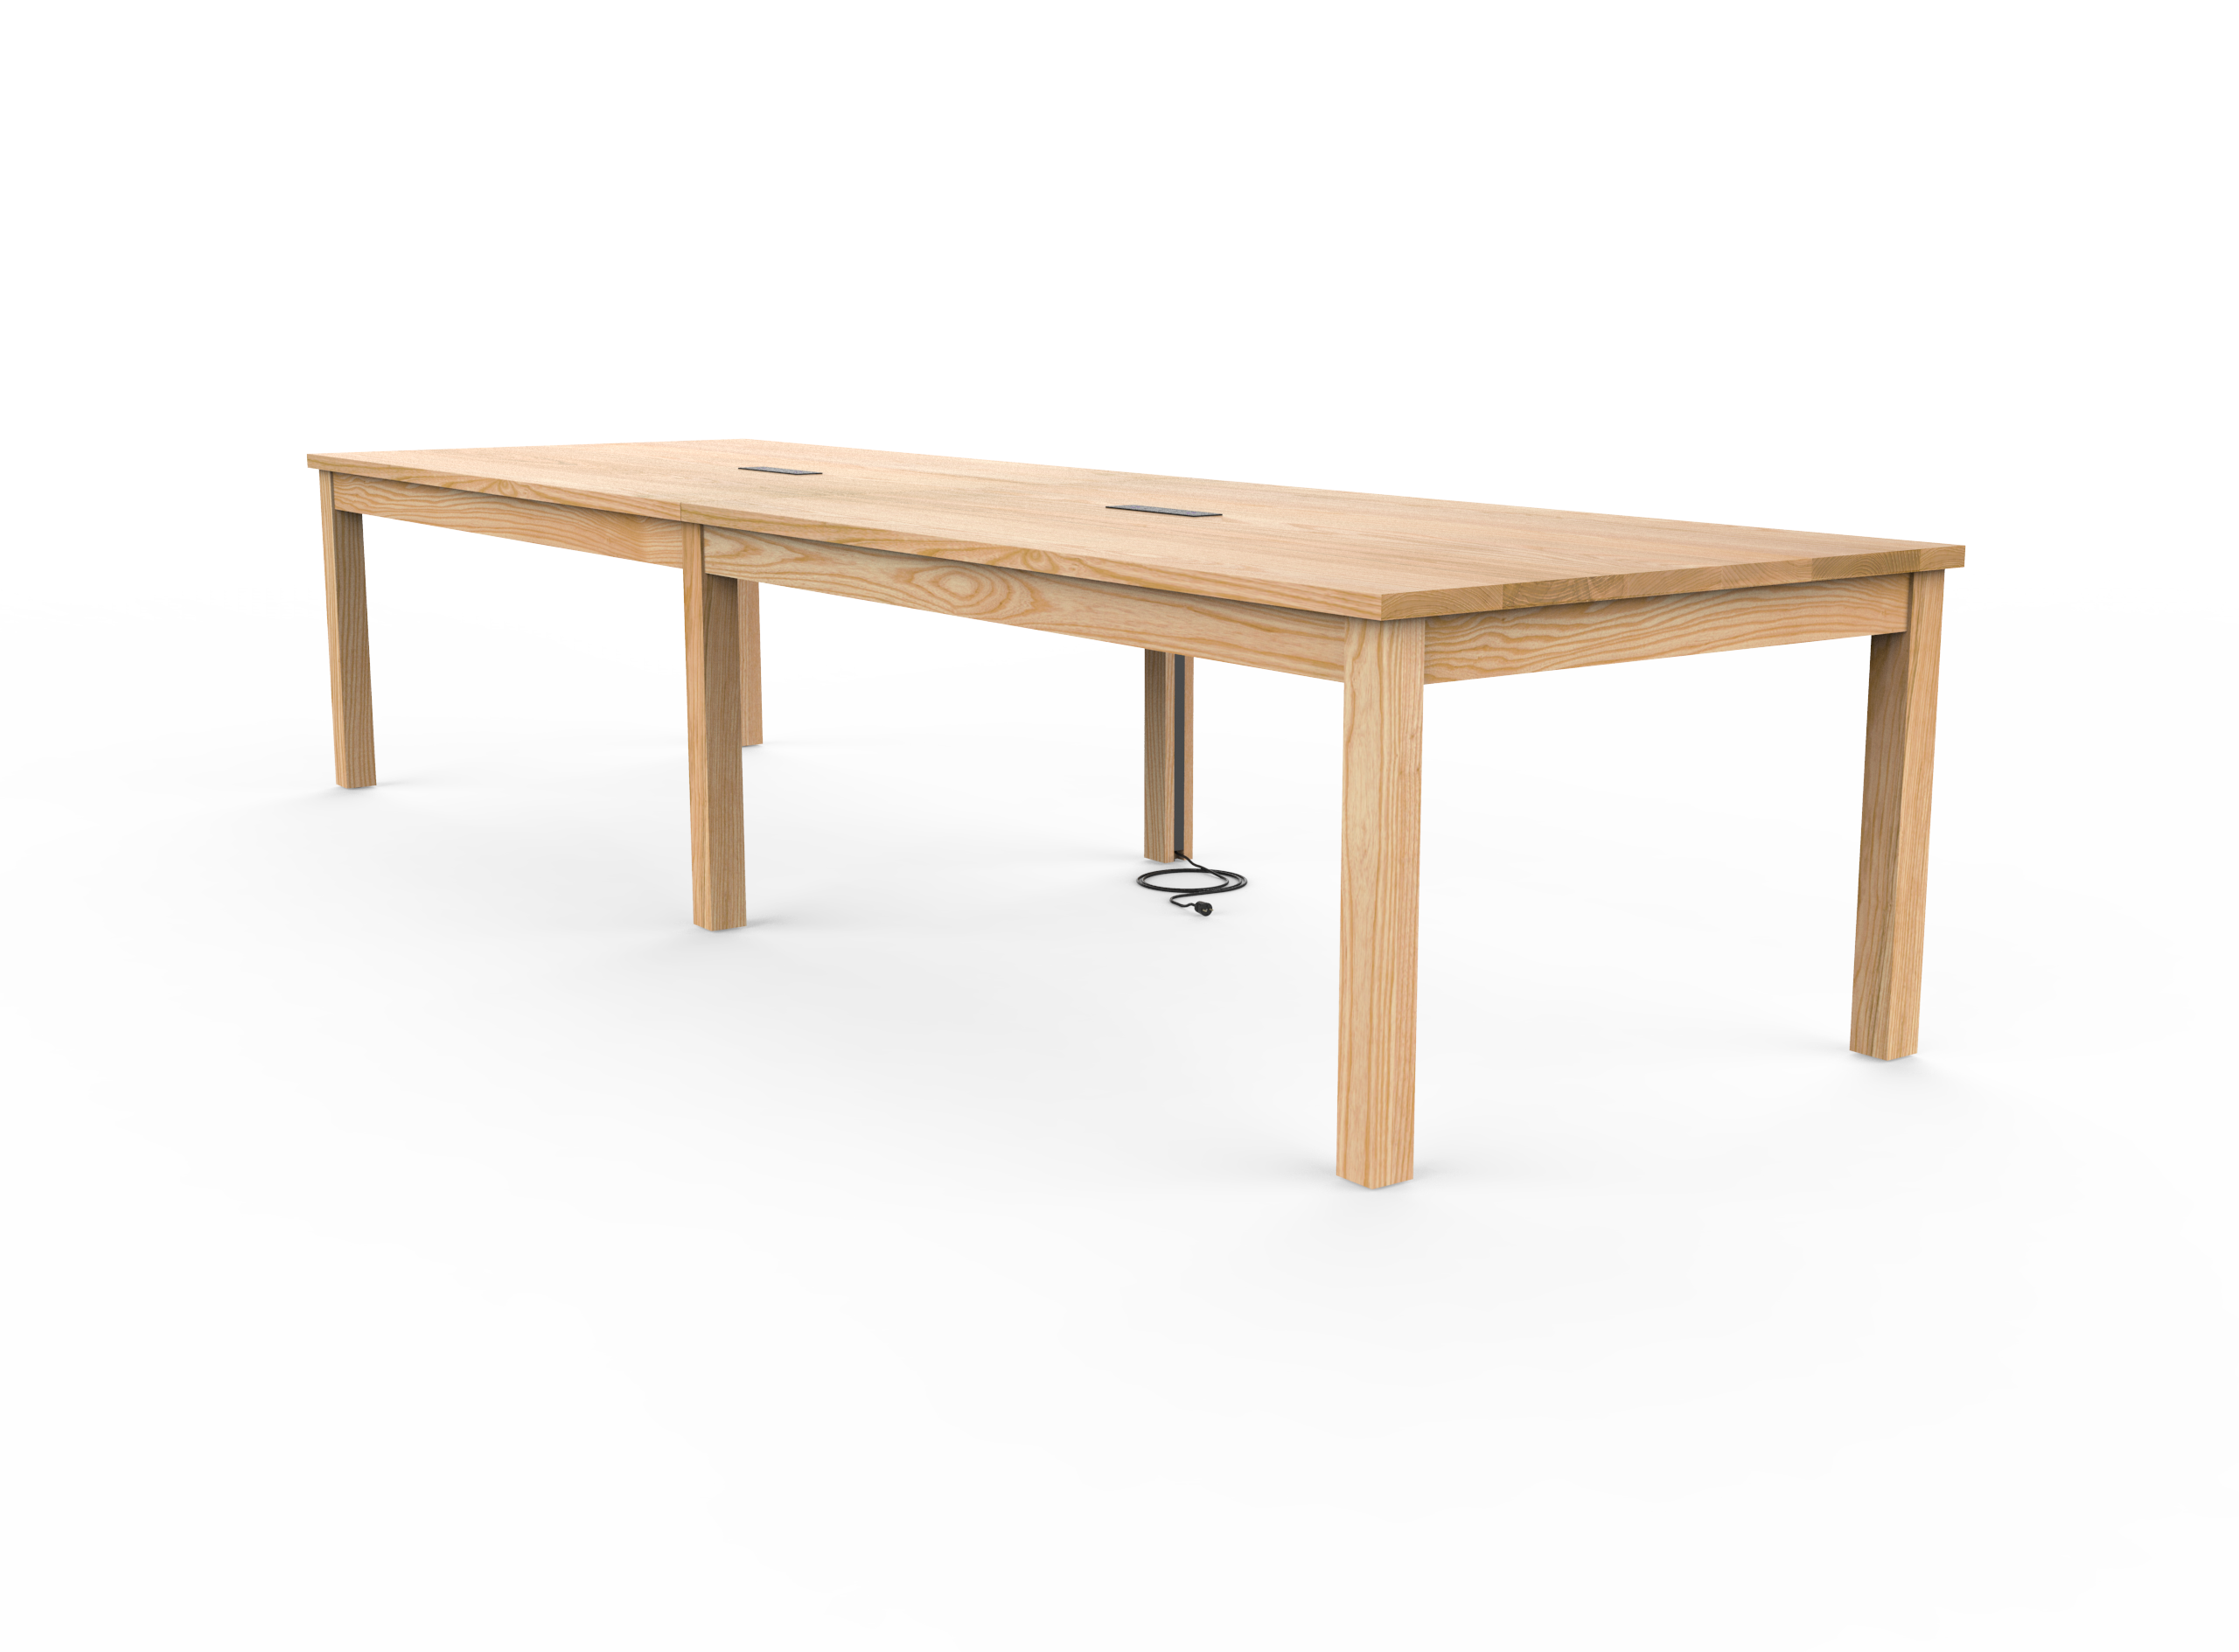 Vermont Farm Table Custom Wood Conference Square Wood 003 Ash 